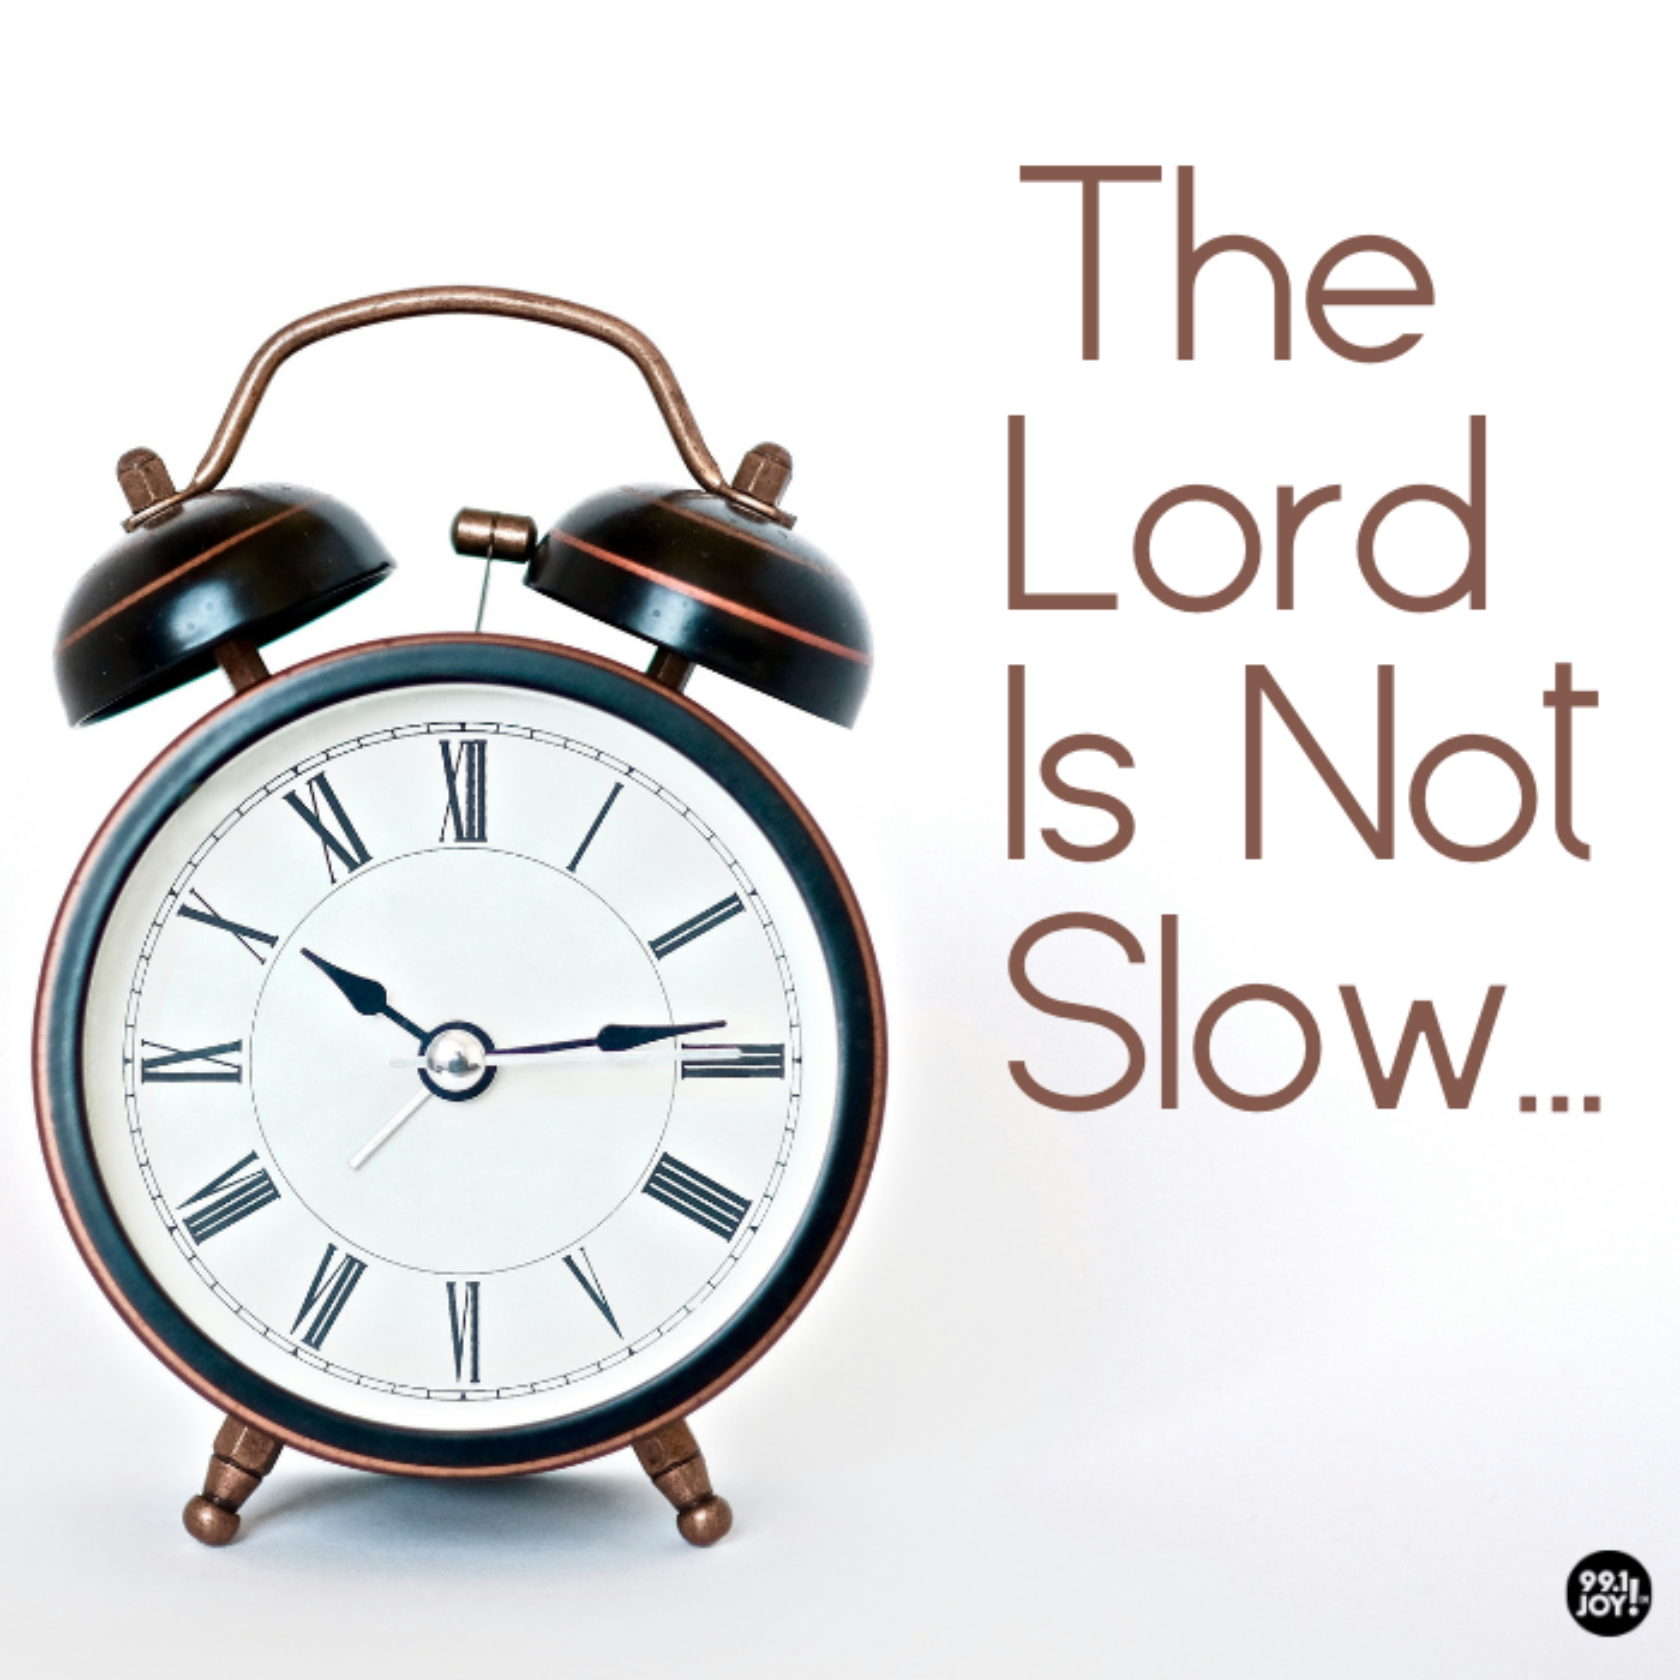 The Lord Is Not Slow…